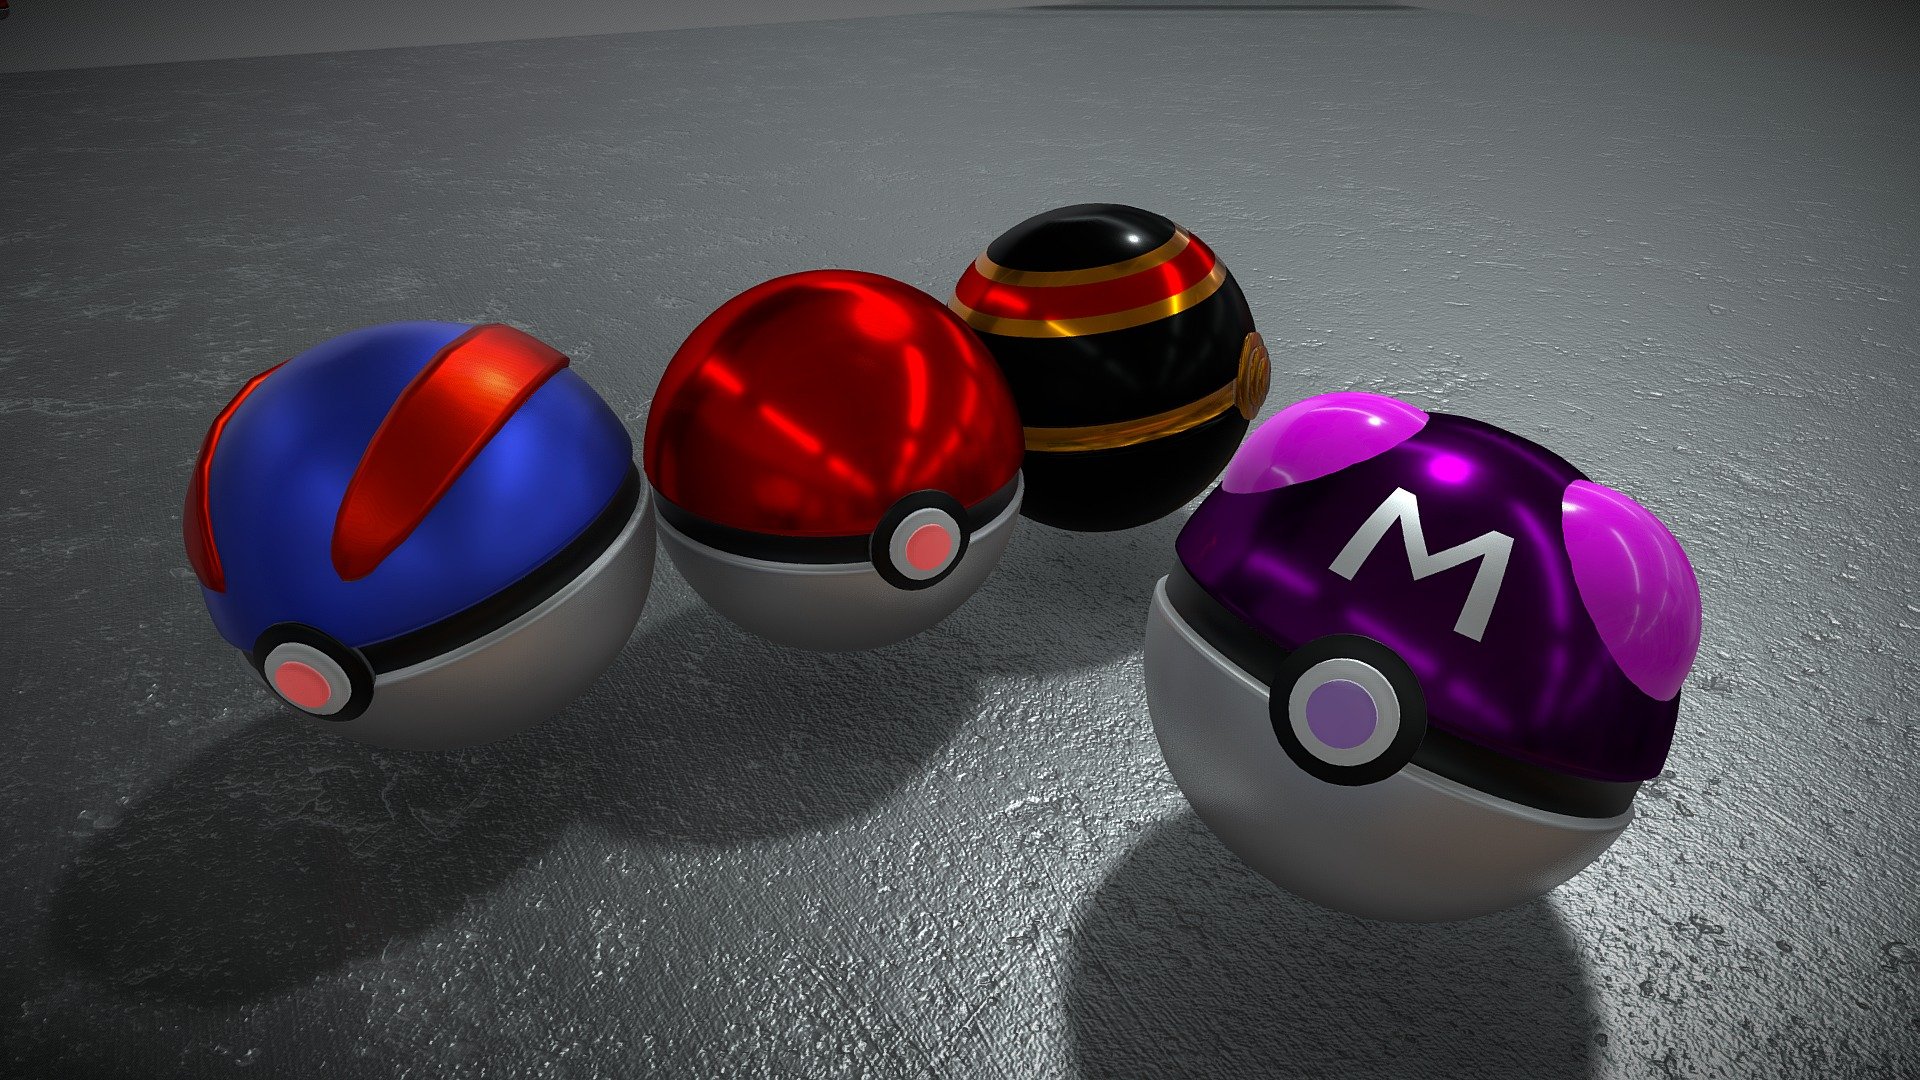 Just a modest set of pokéballs, including a normal pokéball, a great ball, a luxury ball and the all mighty master ball. For some reason there is a little mesh on the model which I can't find anywhere in the blender editor, so I just left it there. PS: My original render looks cooler than the one being showed here, but I wasn't able to reproduce the lighting in sketchfab 3d model